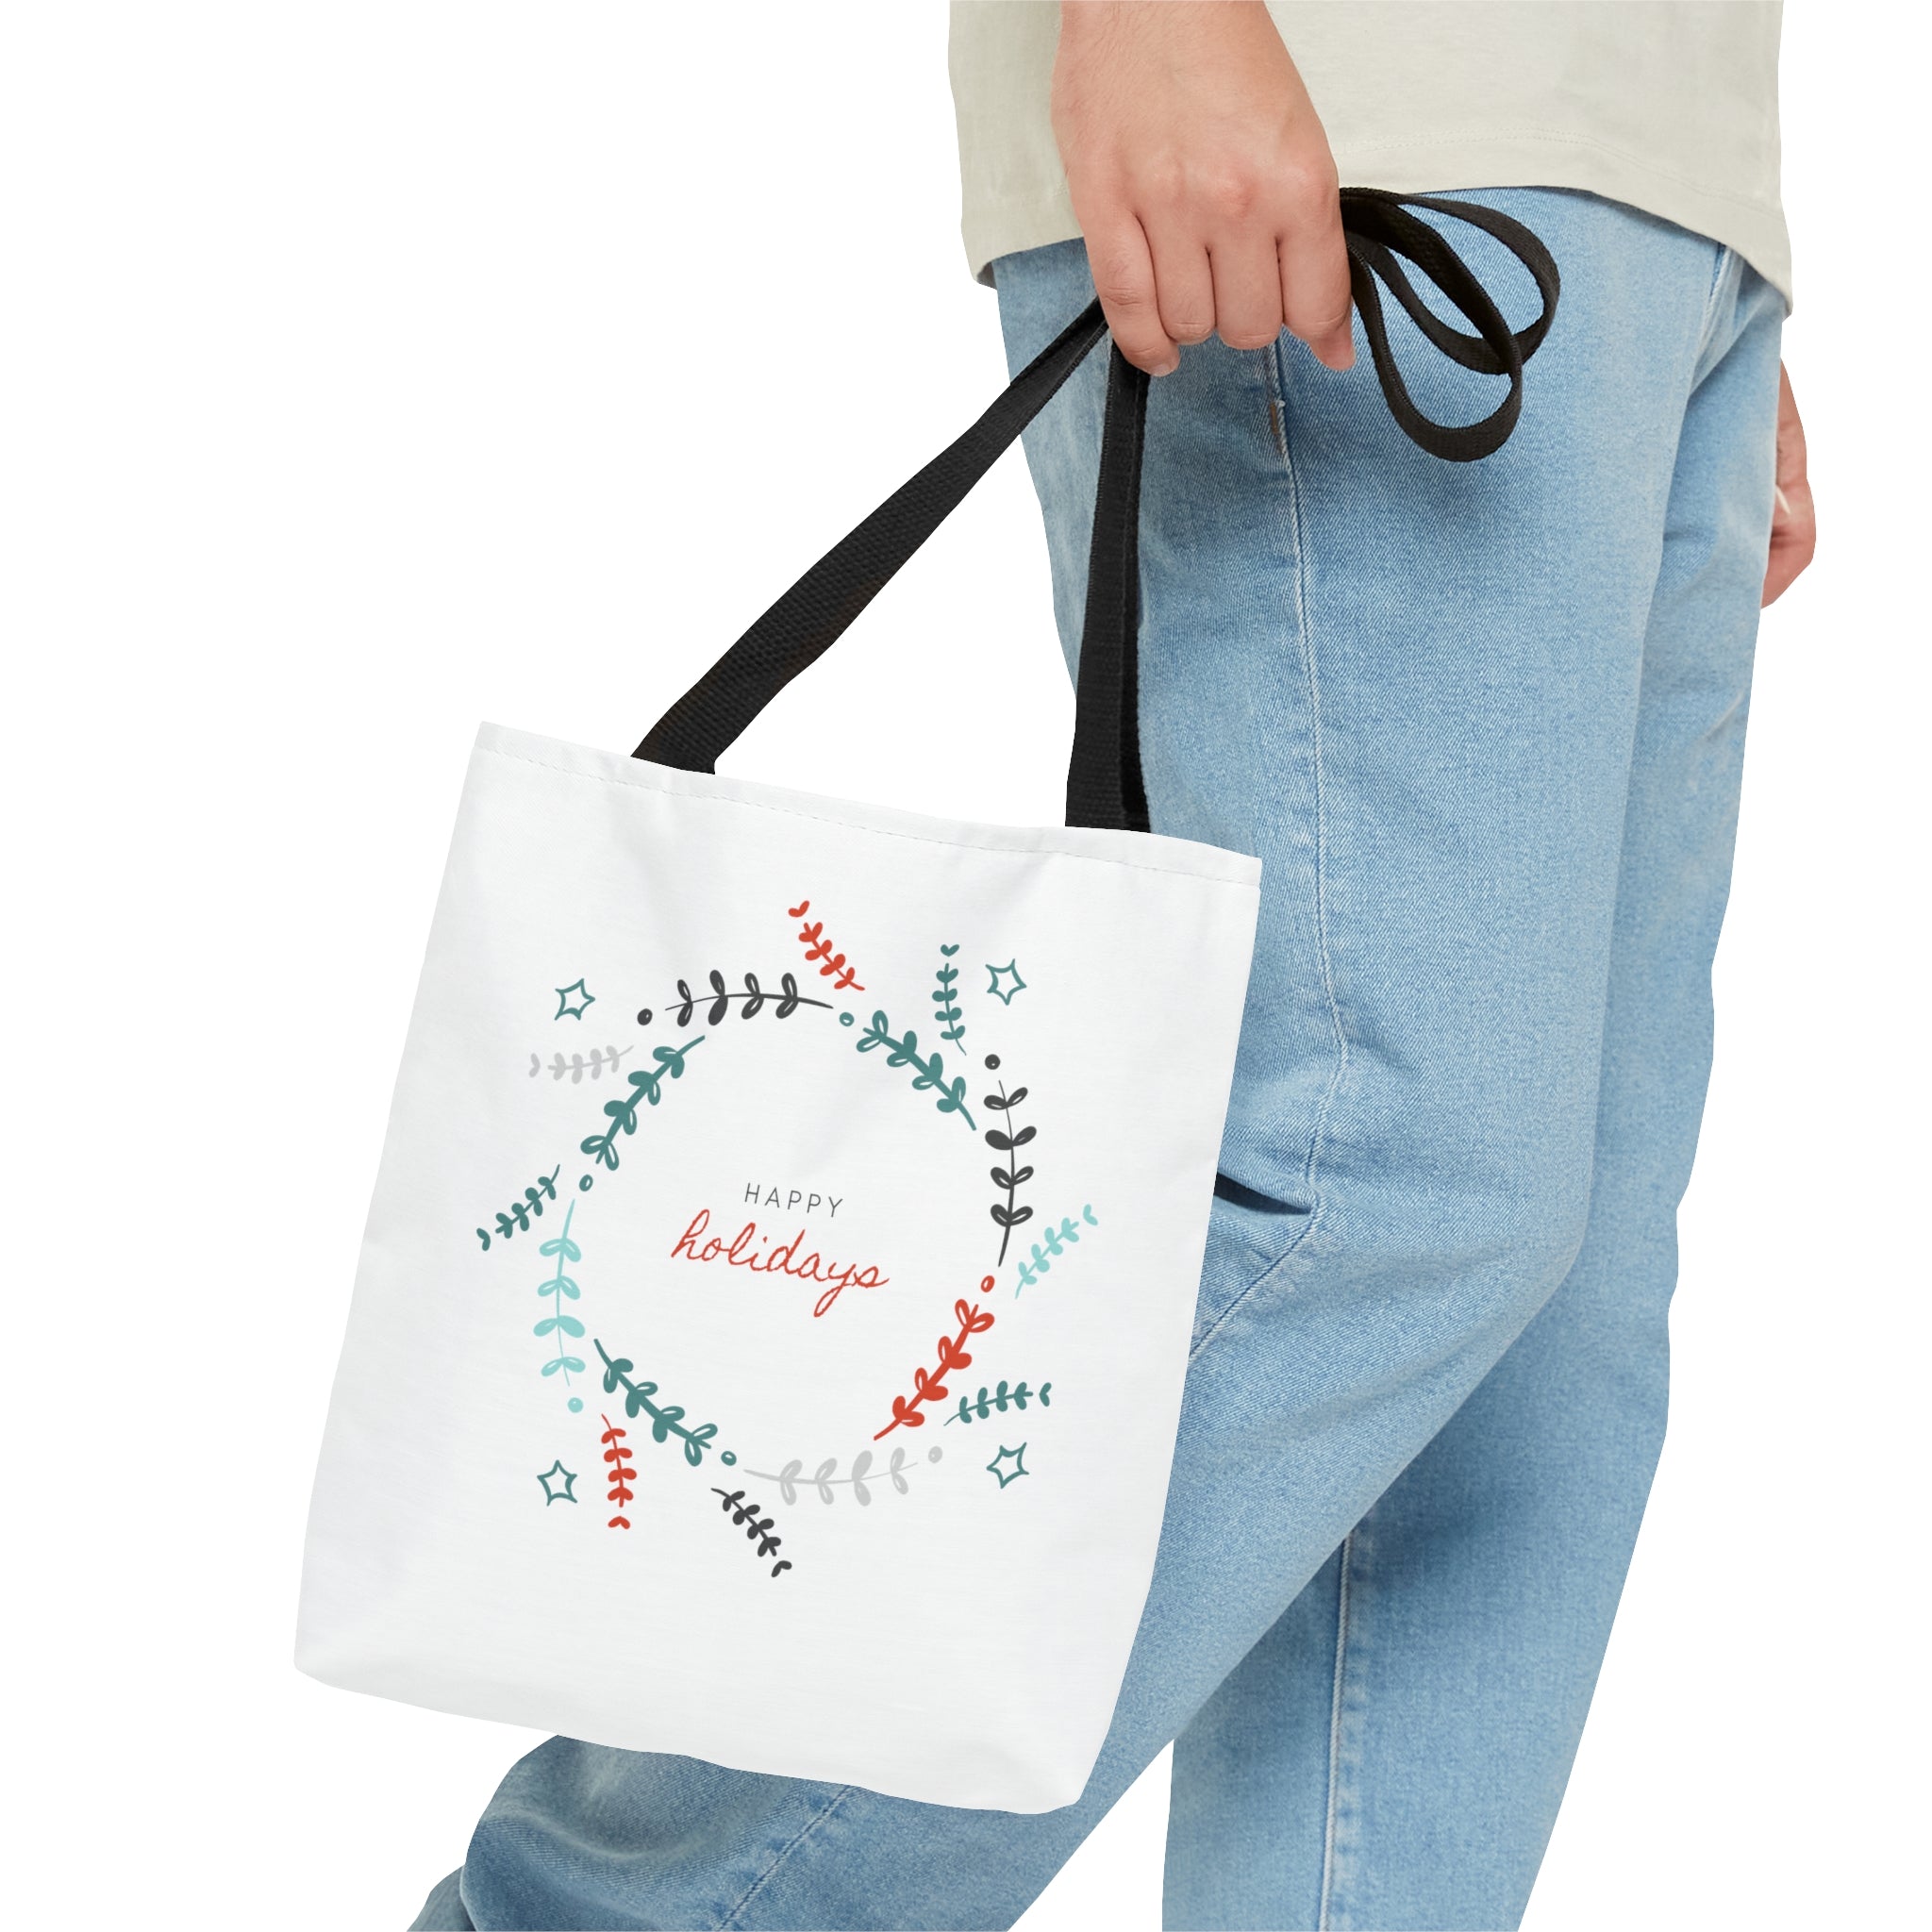 Hapy Holidays Christmas Tote Bags White, Reusable Canvas Tote Bags, Available in Different Size